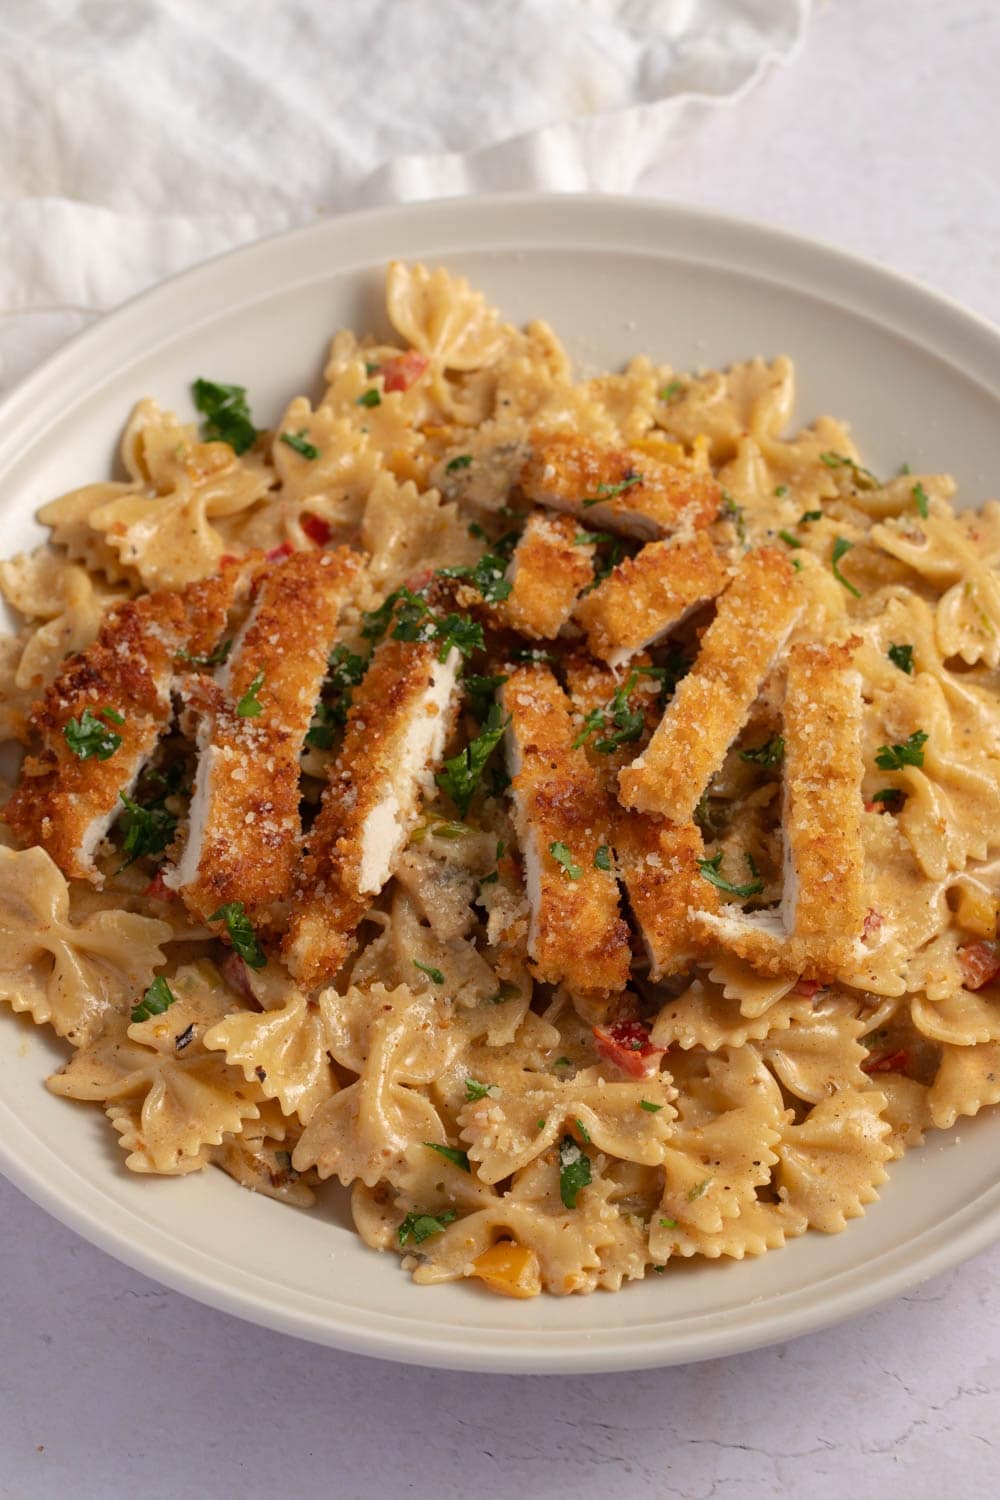 Homemade Chicken Pasta with Farfalle, Mushrooms and Bell Peppers